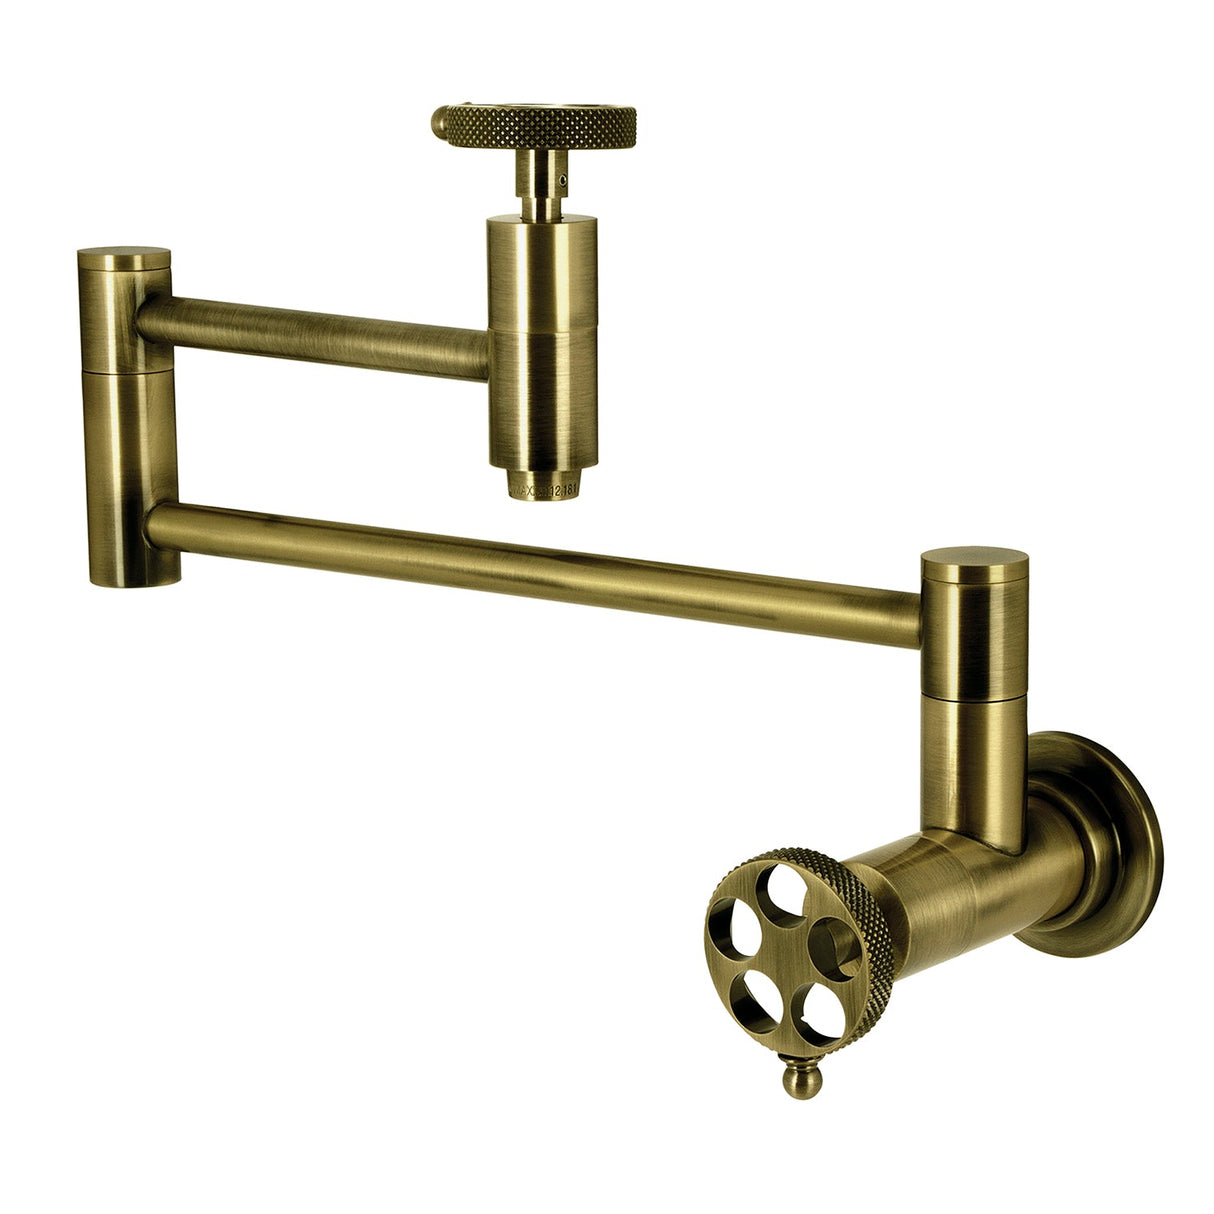 Webb KS8103RKX Two-Handle 1-Hole Wall Mount Pot Filler with Knurled Handle, Antique Brass